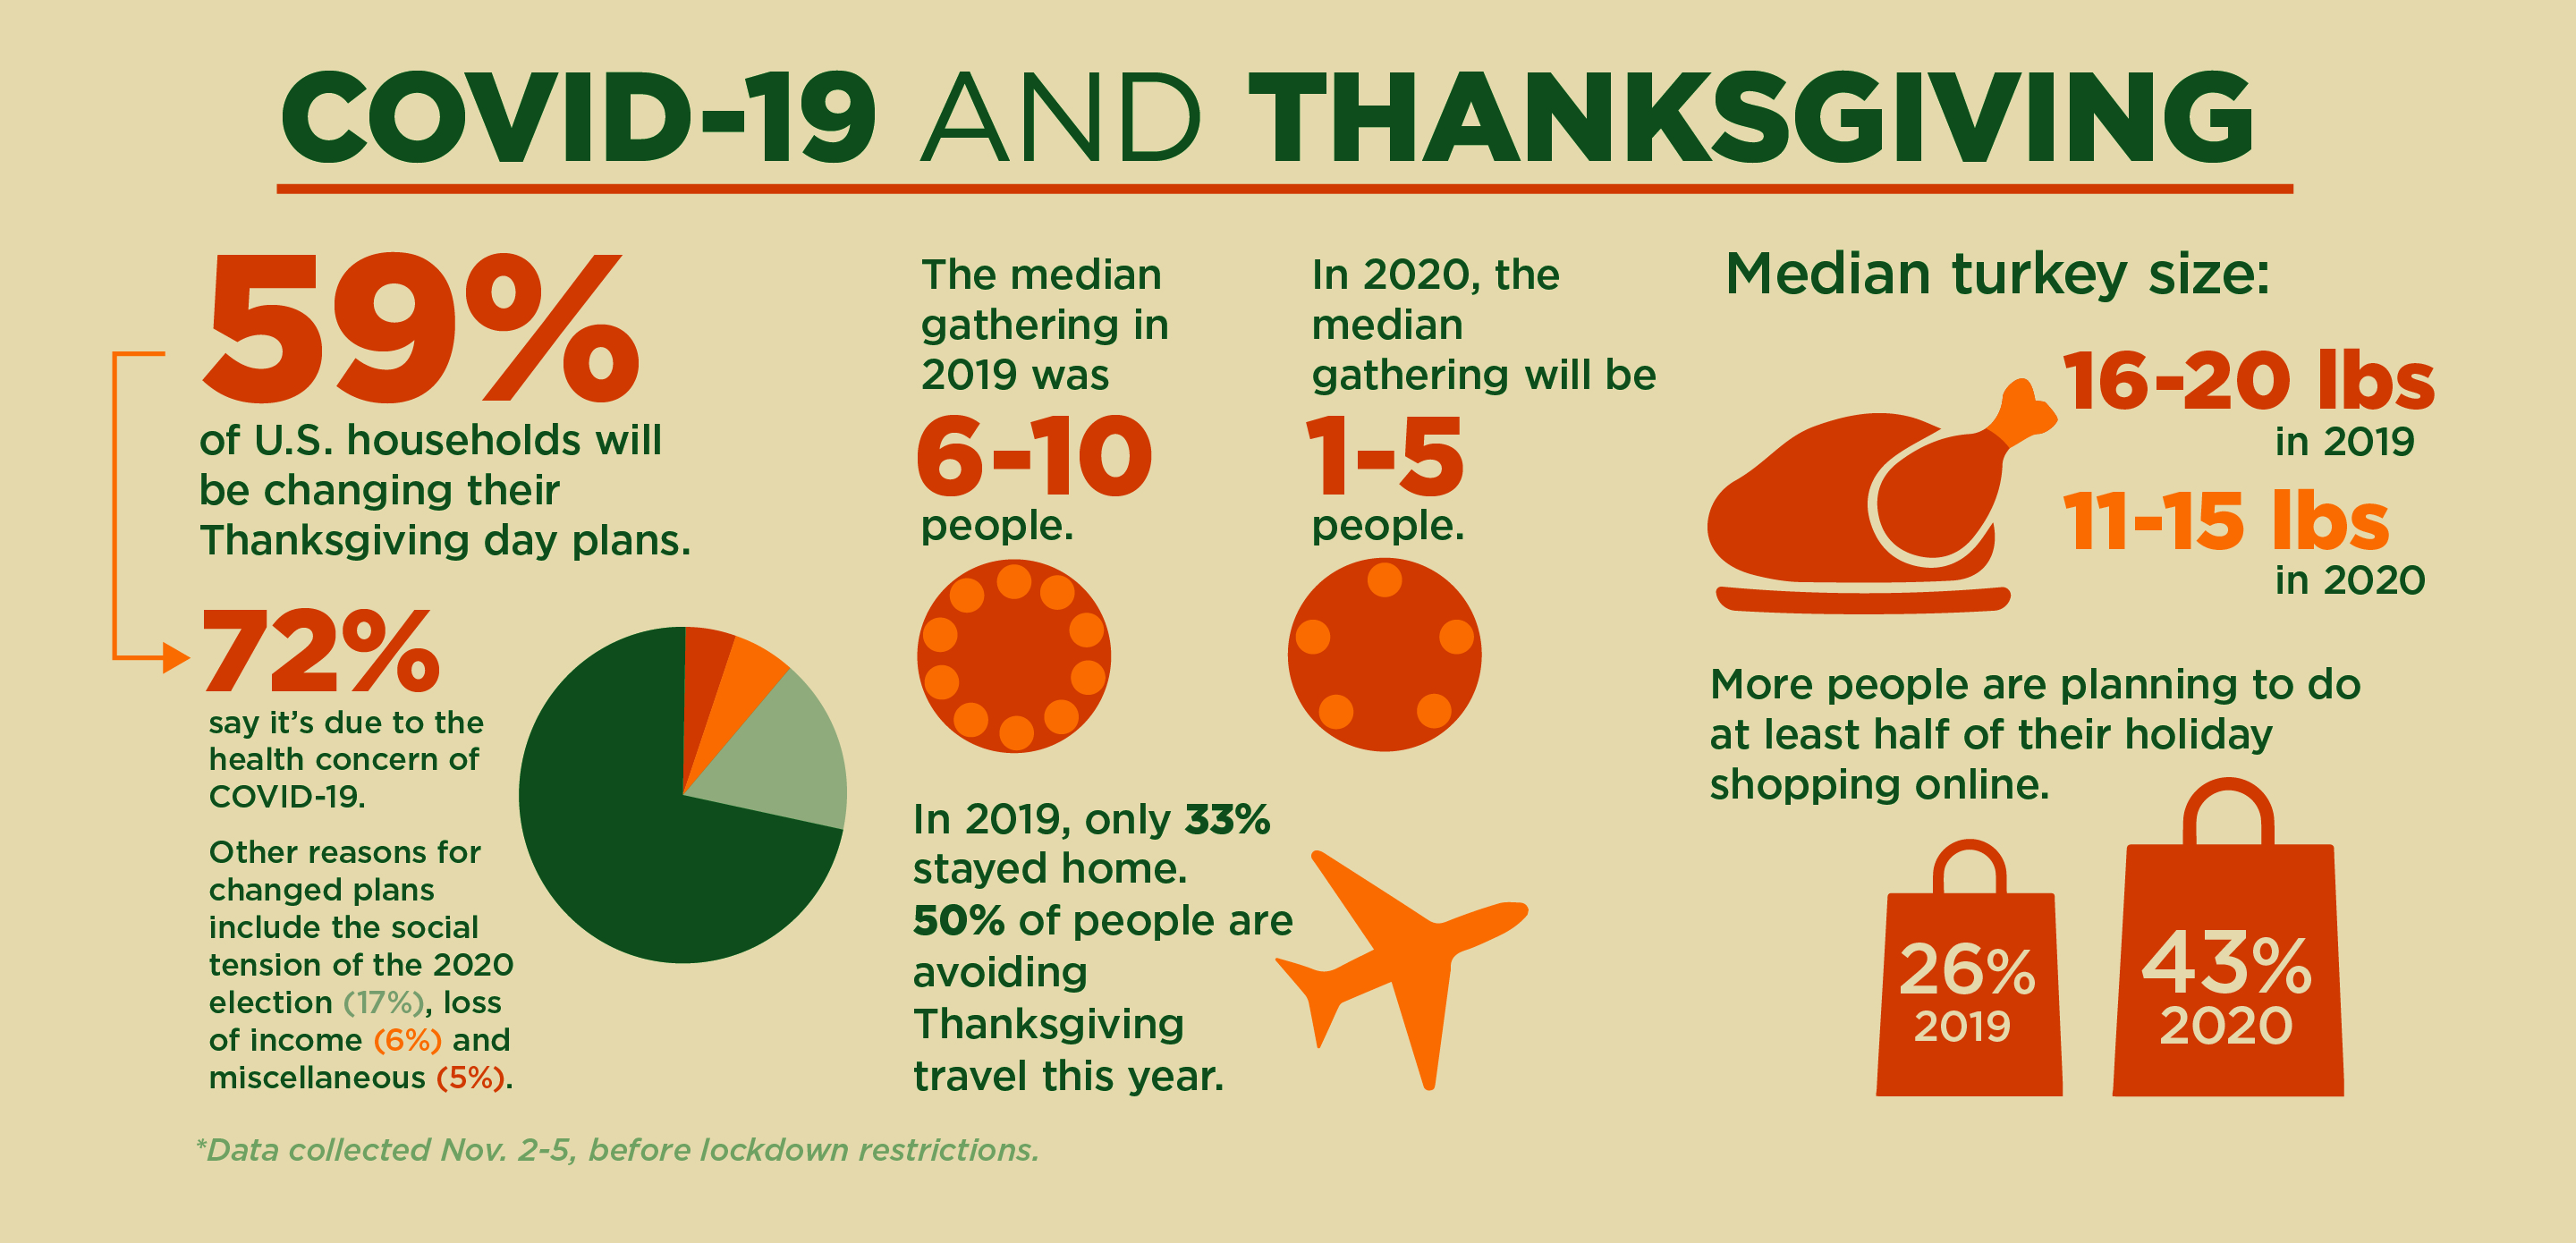 When Is Thanksgiving 2019? - US Thanksgiving Date 2019